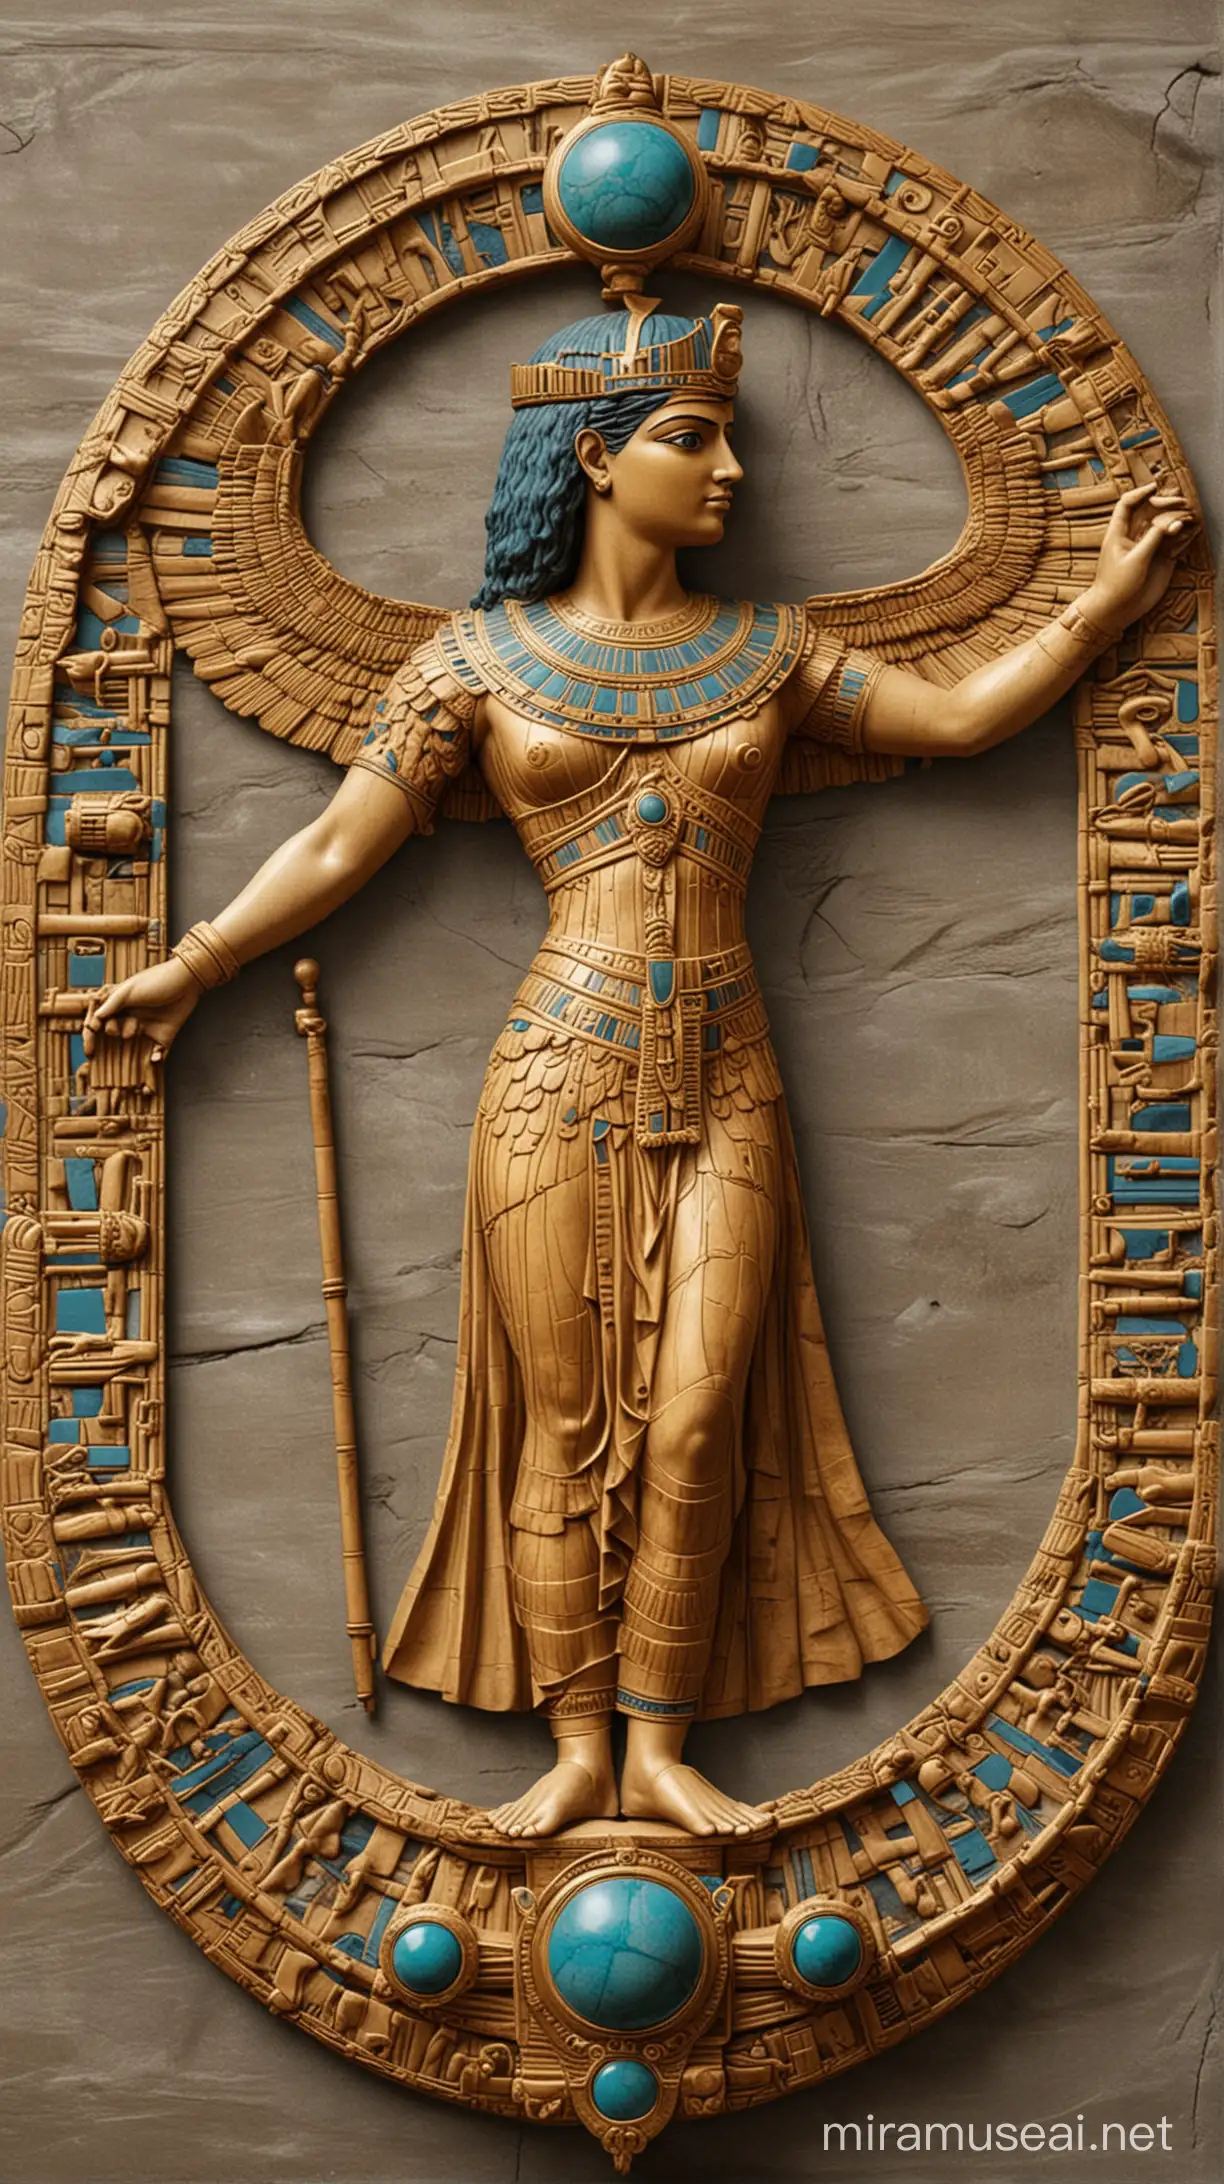 An image of the Ptolemaic dynasty emblem or symbol, representing Cleopatra's royal lineage.hyperrealistic